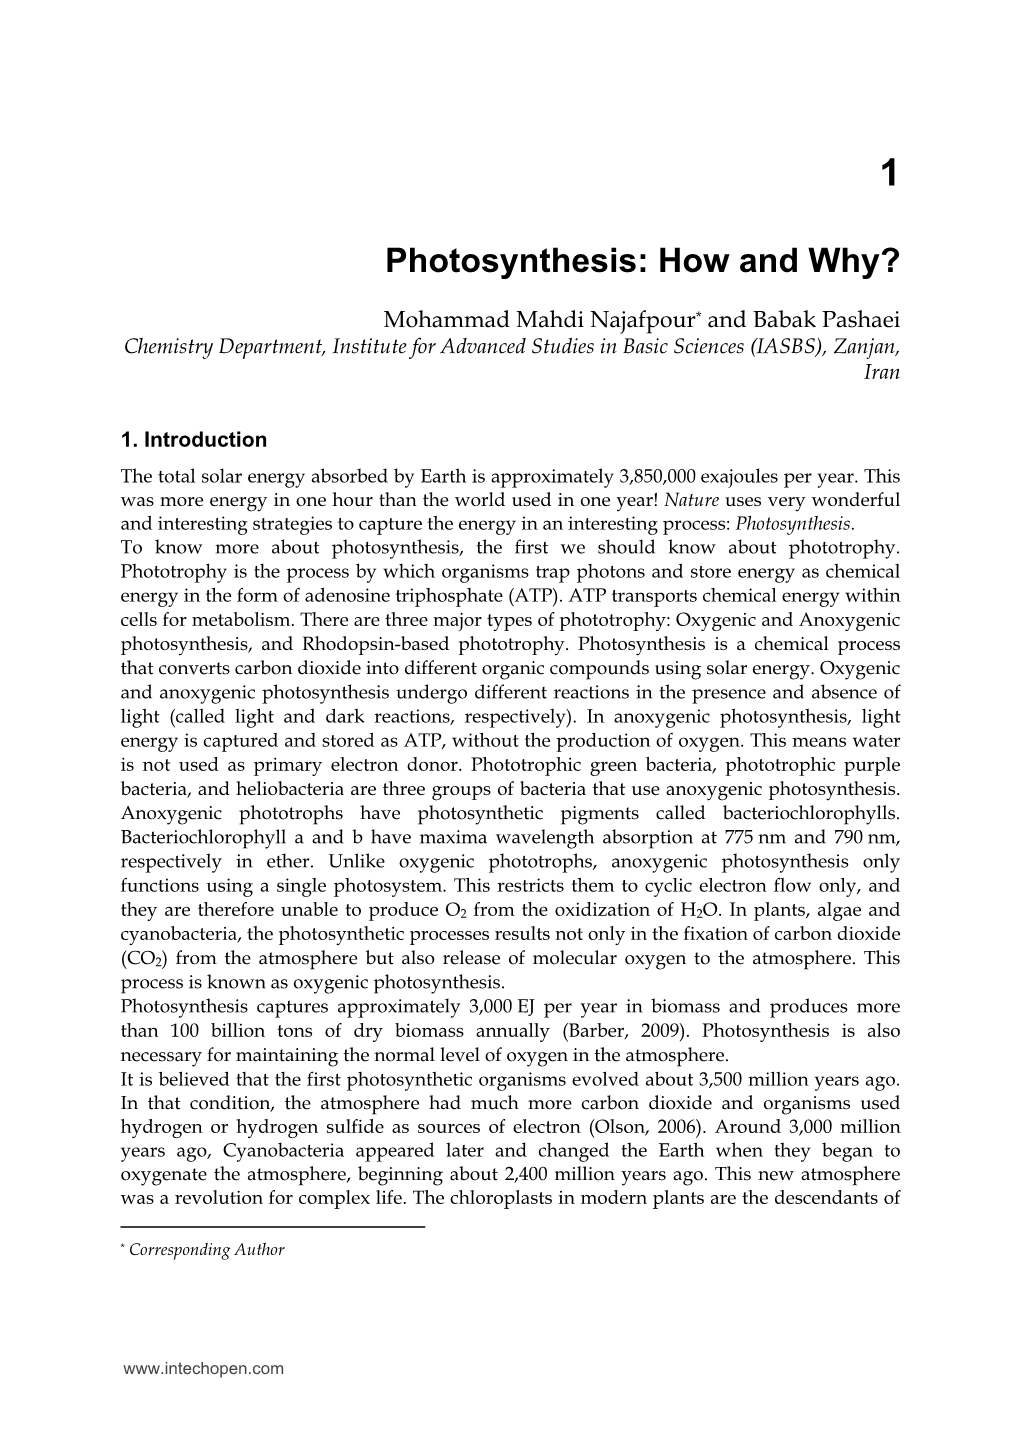 Photosynthesis: How and Why?